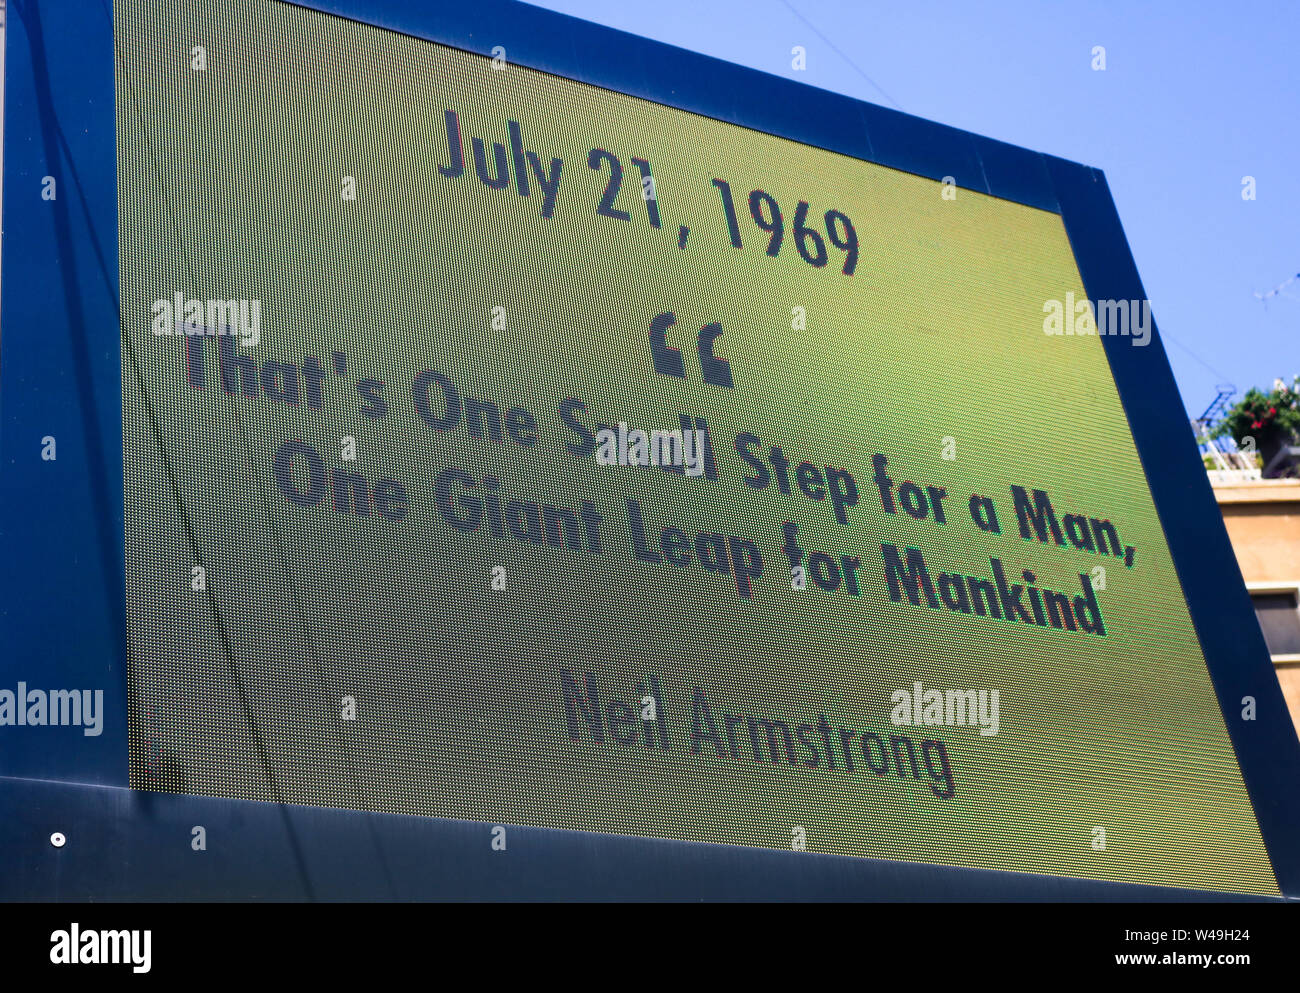 Beirut, Lebanon. 21st July 2019. A giant billboard in Beirut celebrates the 50th anniversary of the Apollo 11 landing on the moon surface on 21 July 1969 with the famous quote by American astronaunt Neil Armstrong  Credit: amer ghazzal/Alamy Live News Stock Photo